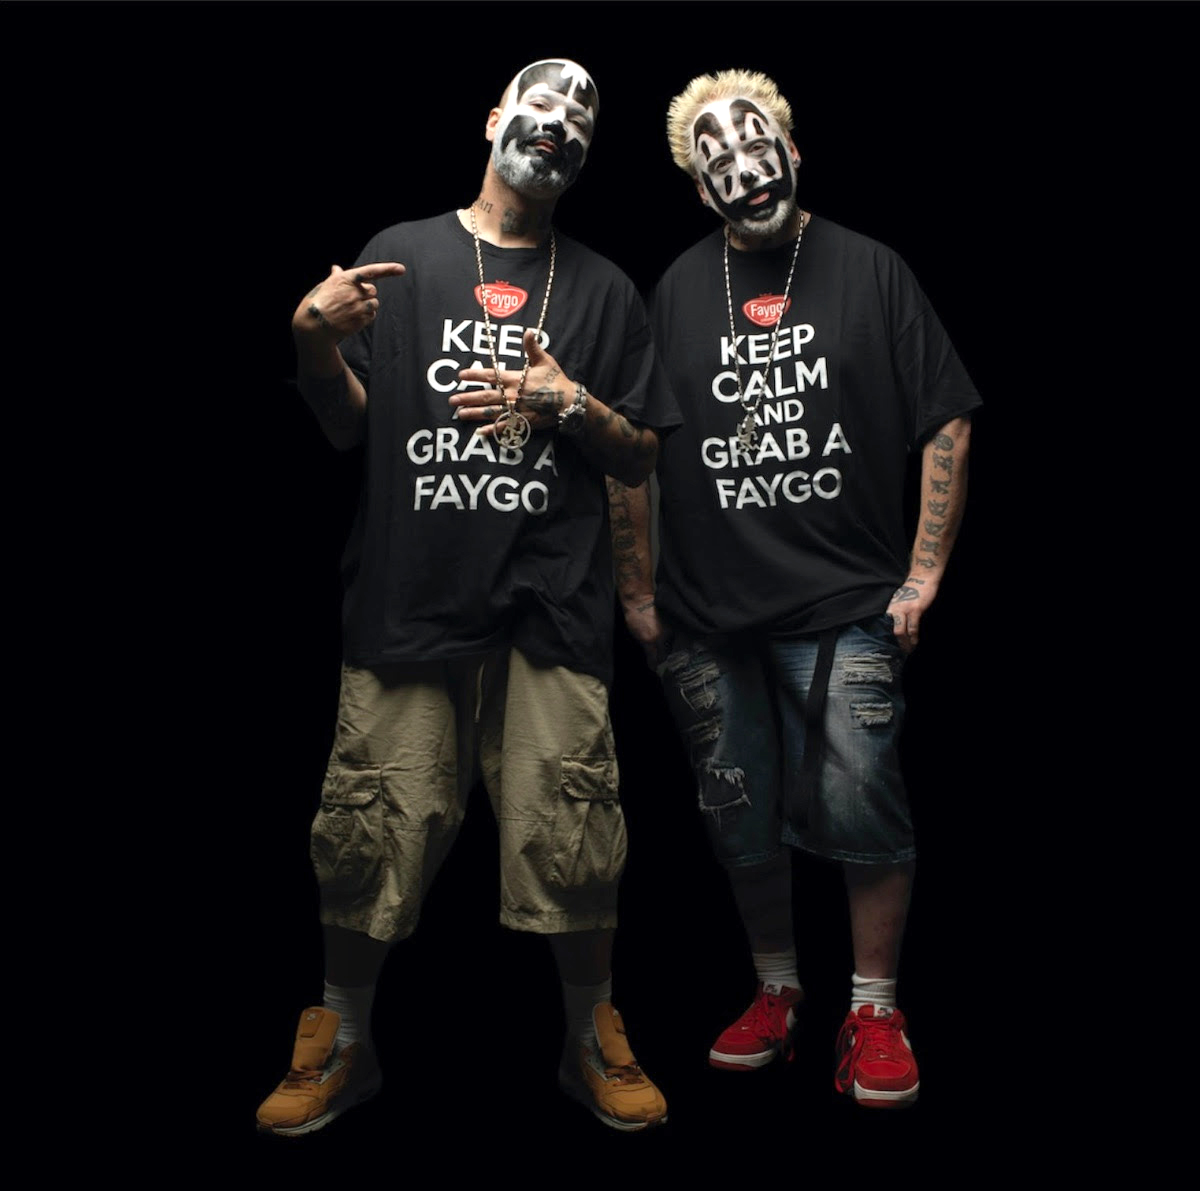 Official ICP Merch: Dress like a Wicked Clown